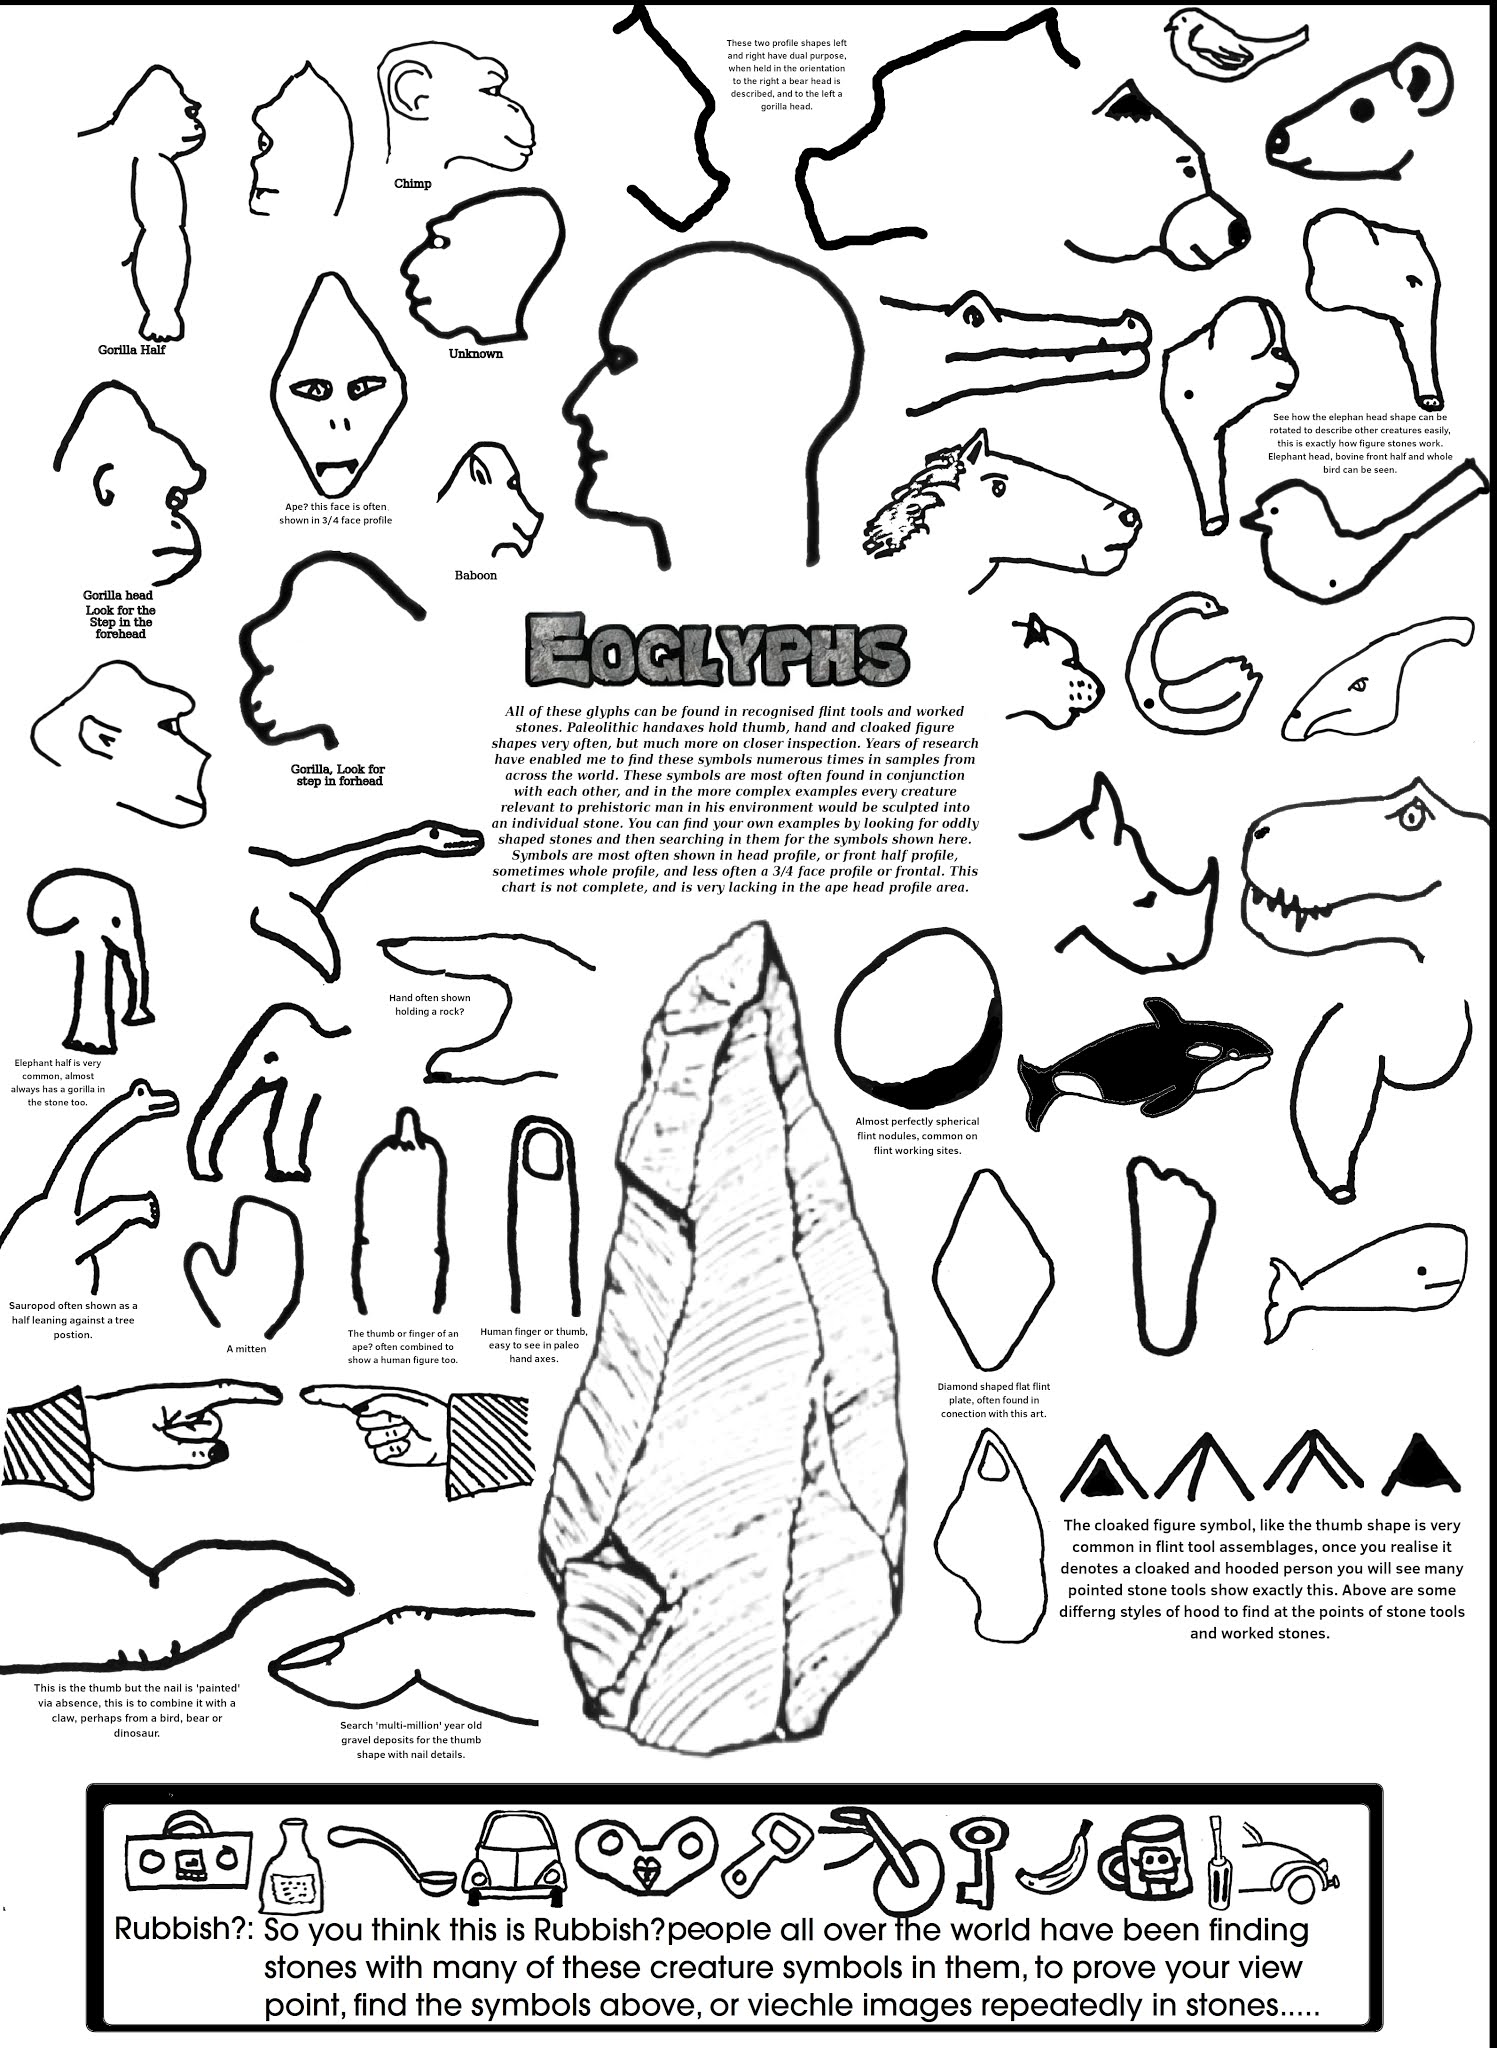 Portable Rock Art and Figure Stones Forum Rules TEST123456